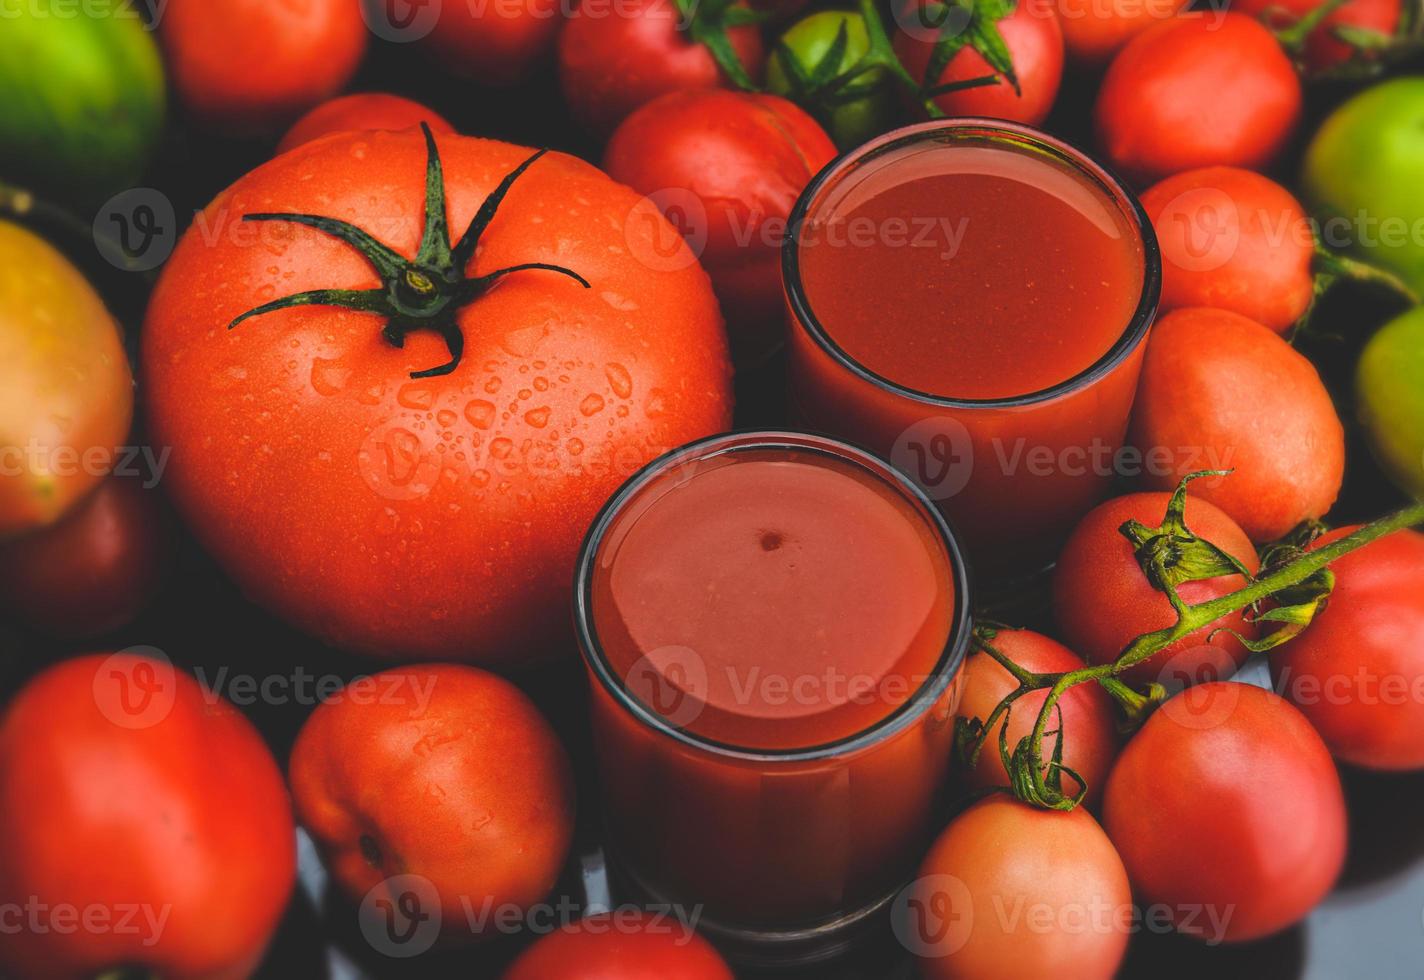 Mix tomatoes and juices in glass. photo